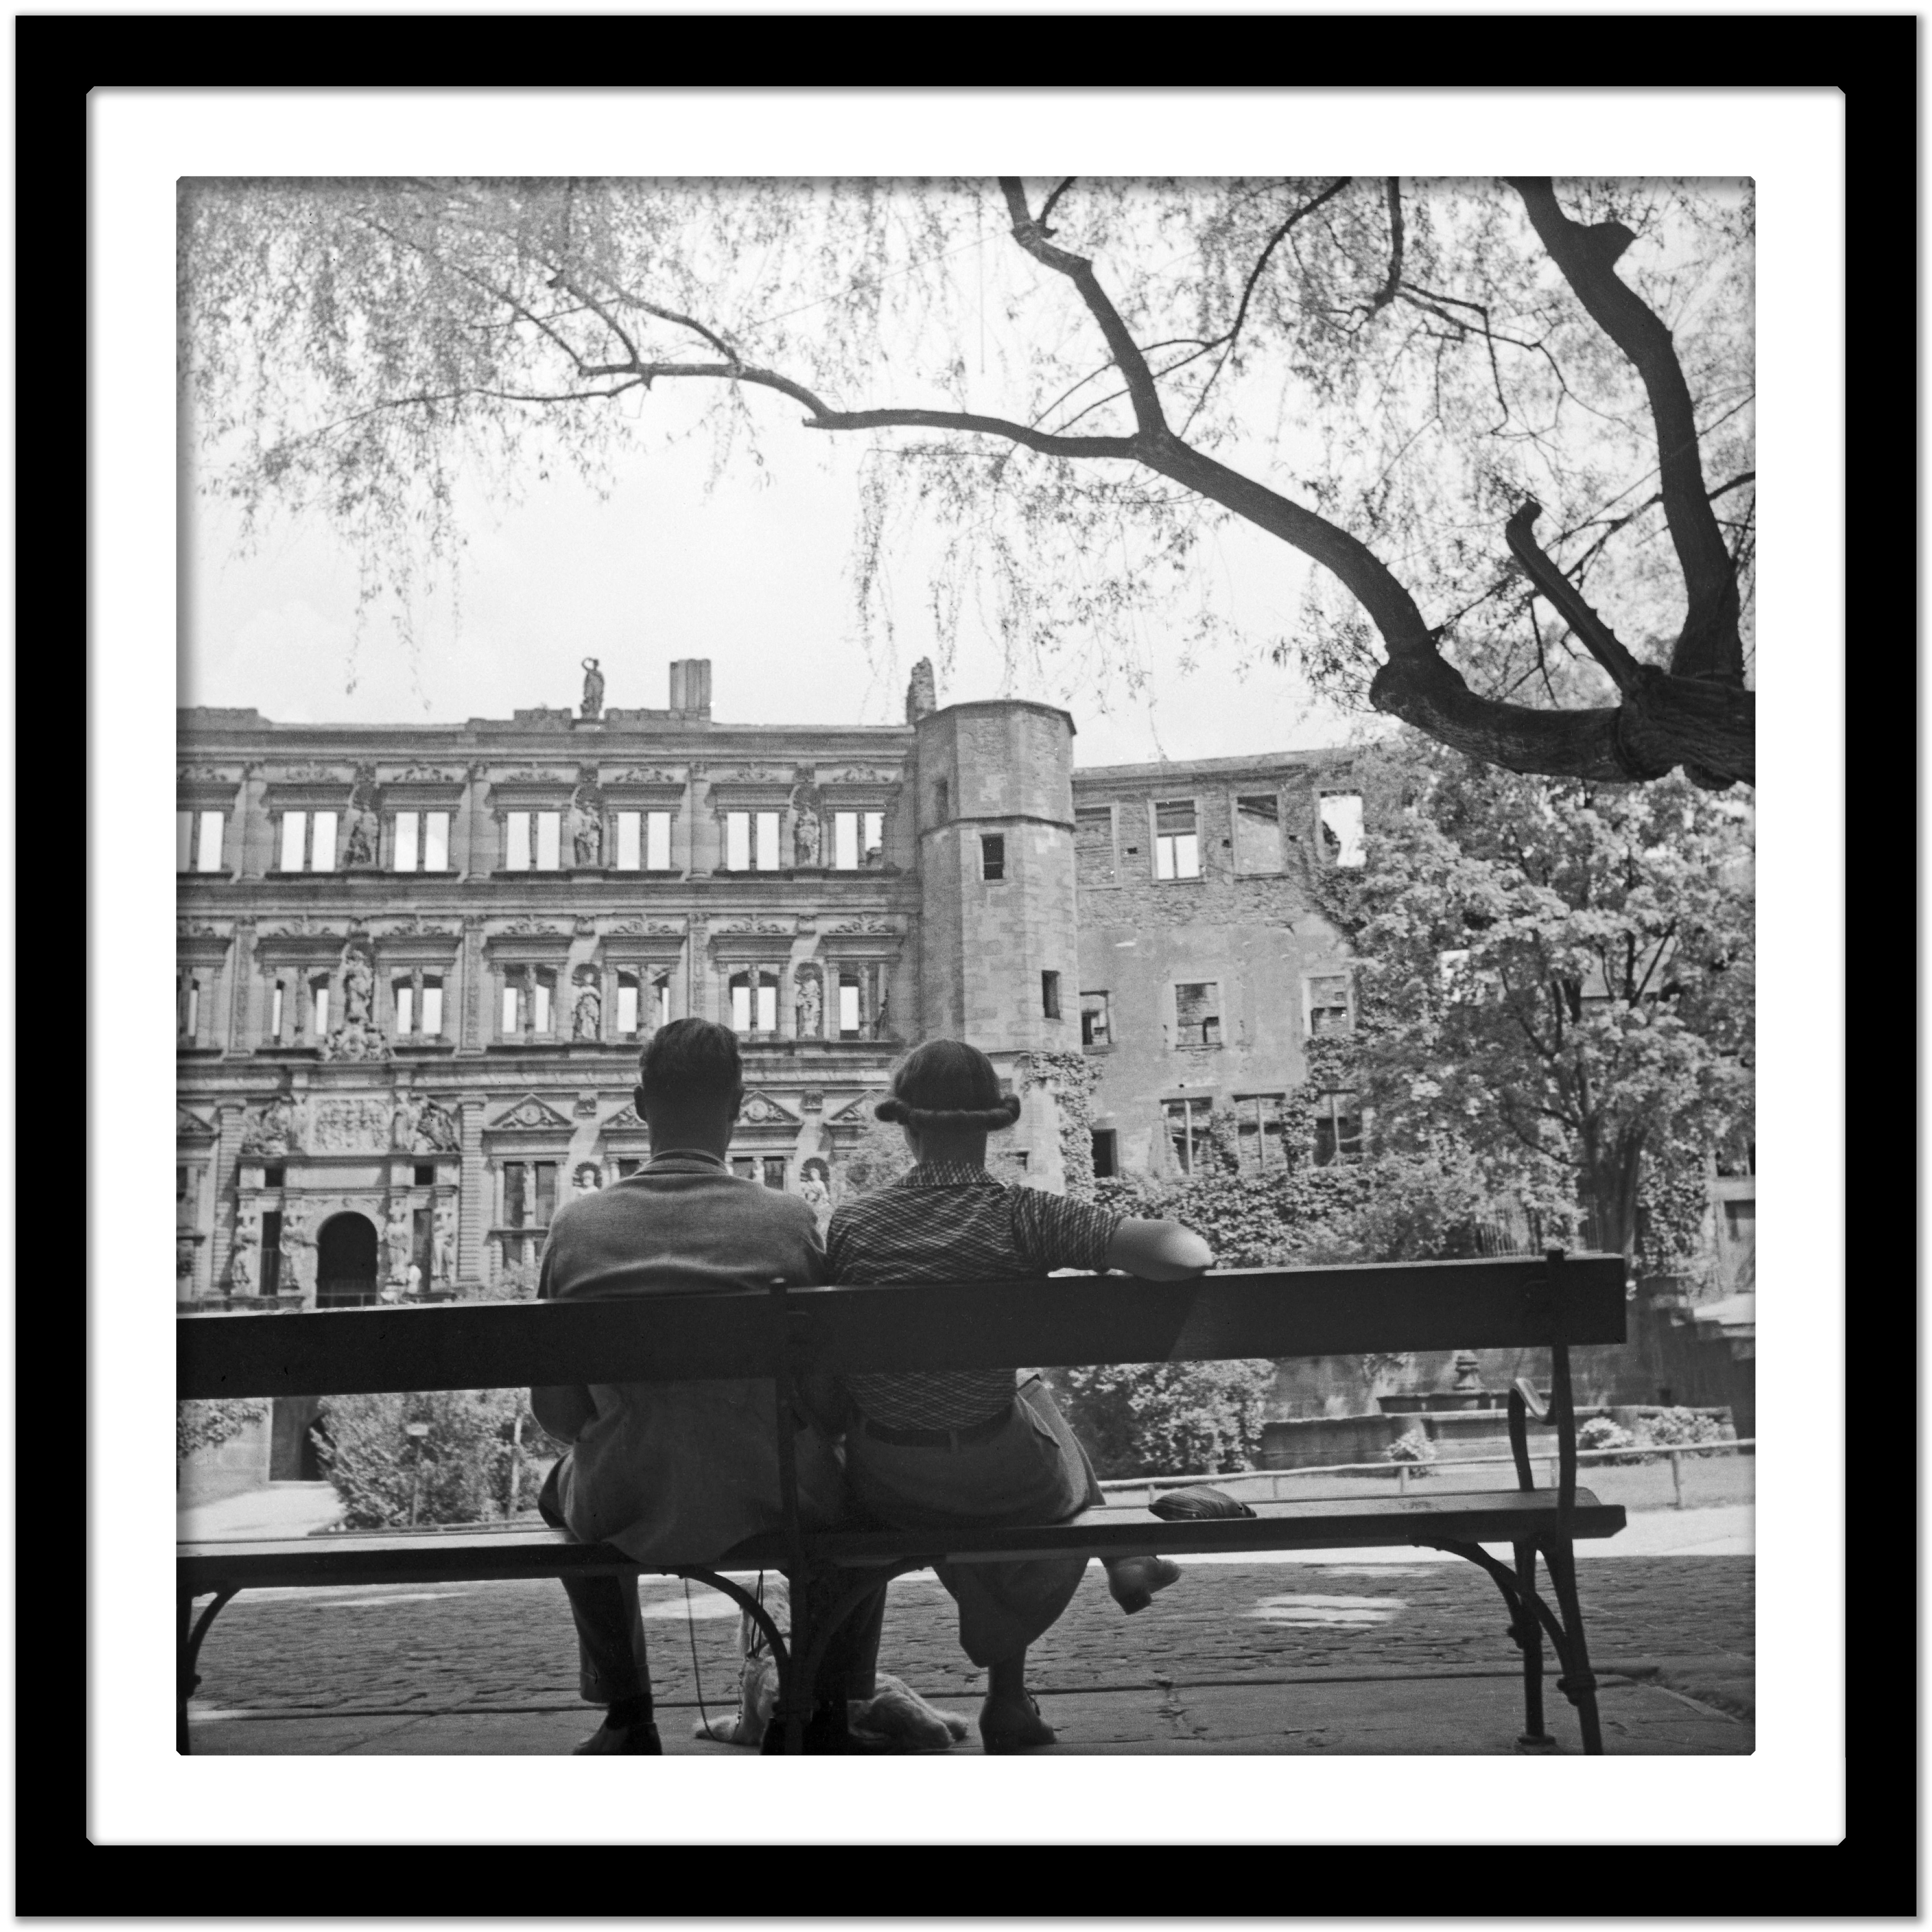 Couple on bench view to Heidelberg castle, Germany 1936, Printed Later  - Gray Black and White Photograph by Karl Heinrich Lämmel